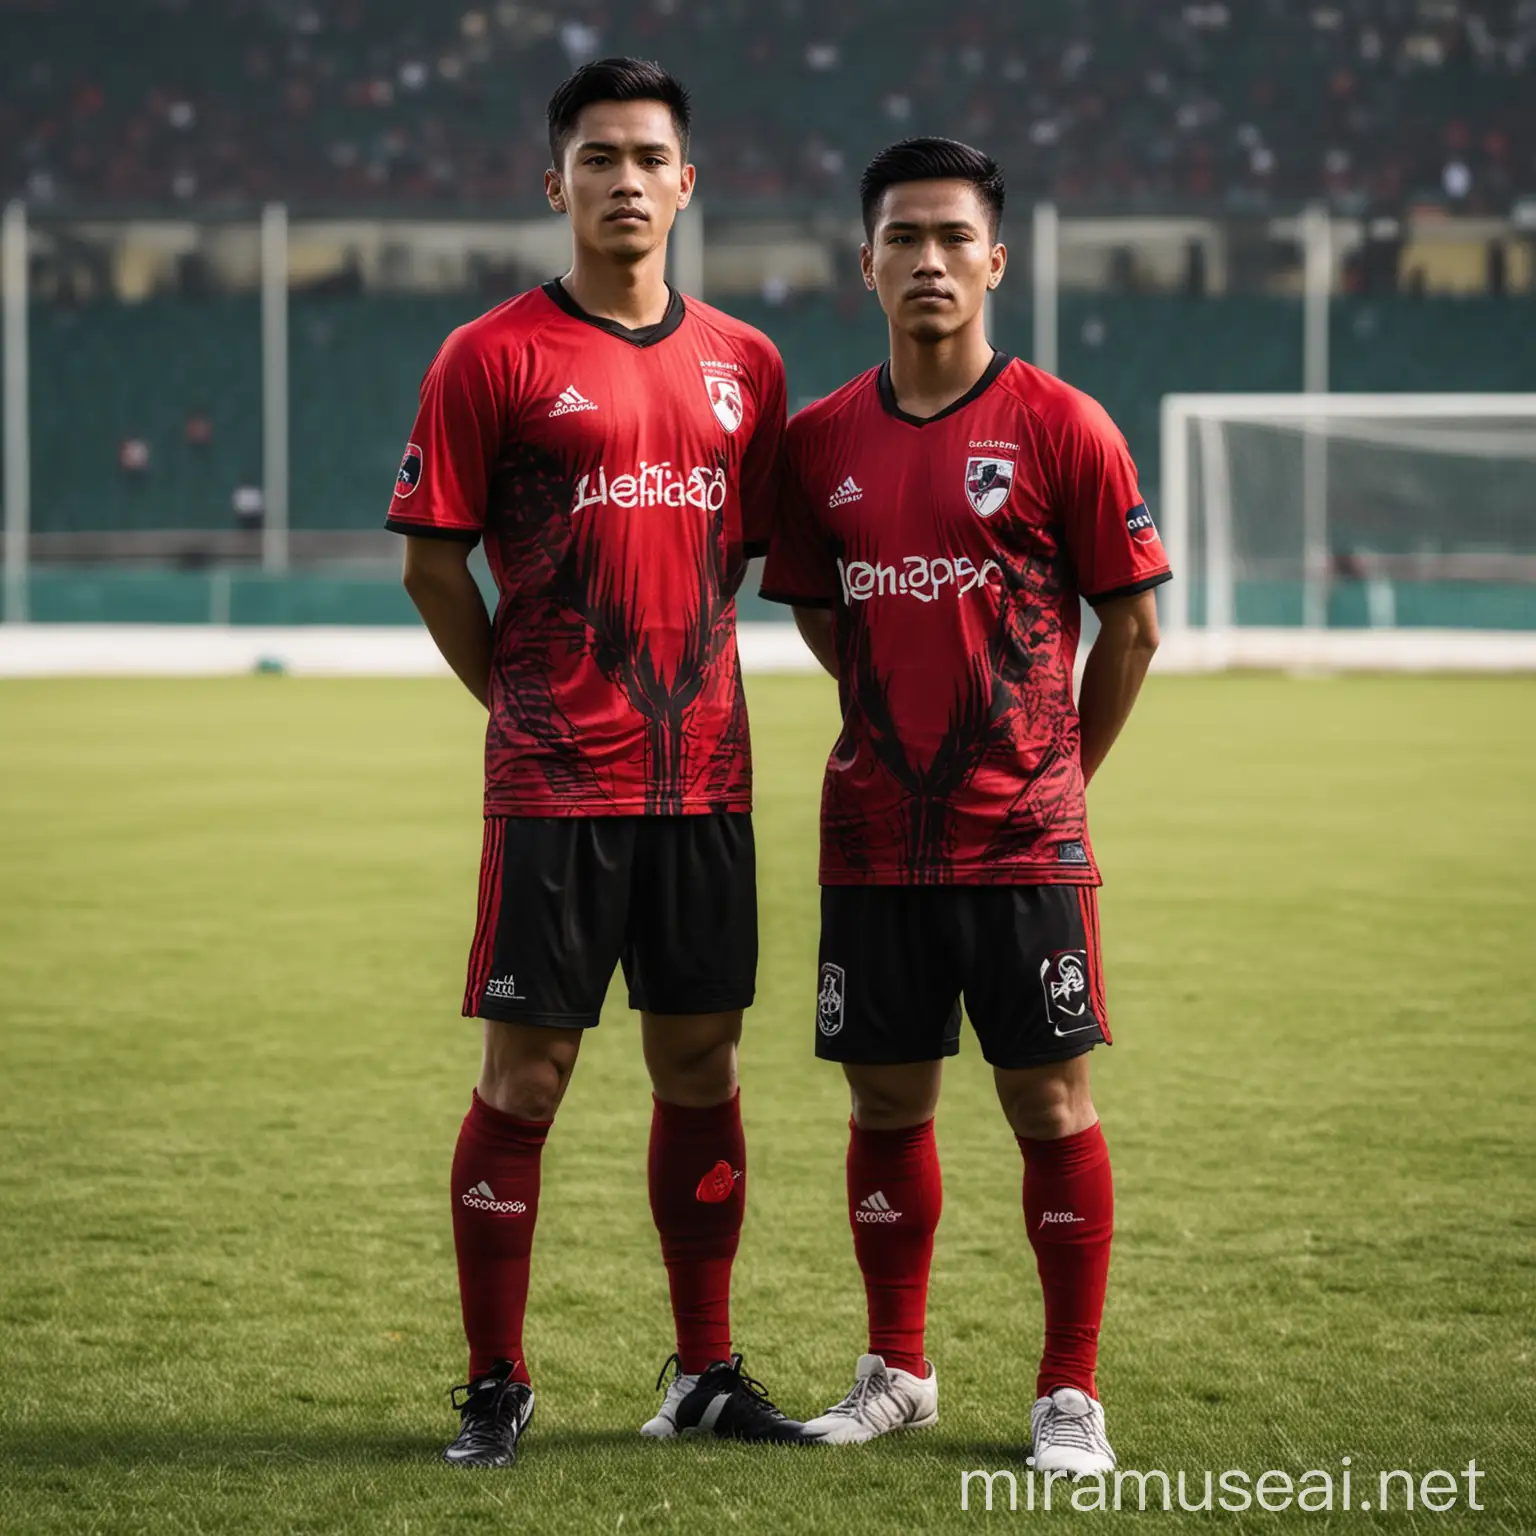 Indonesian Men in Black and Red Soccer Jerseys on Field